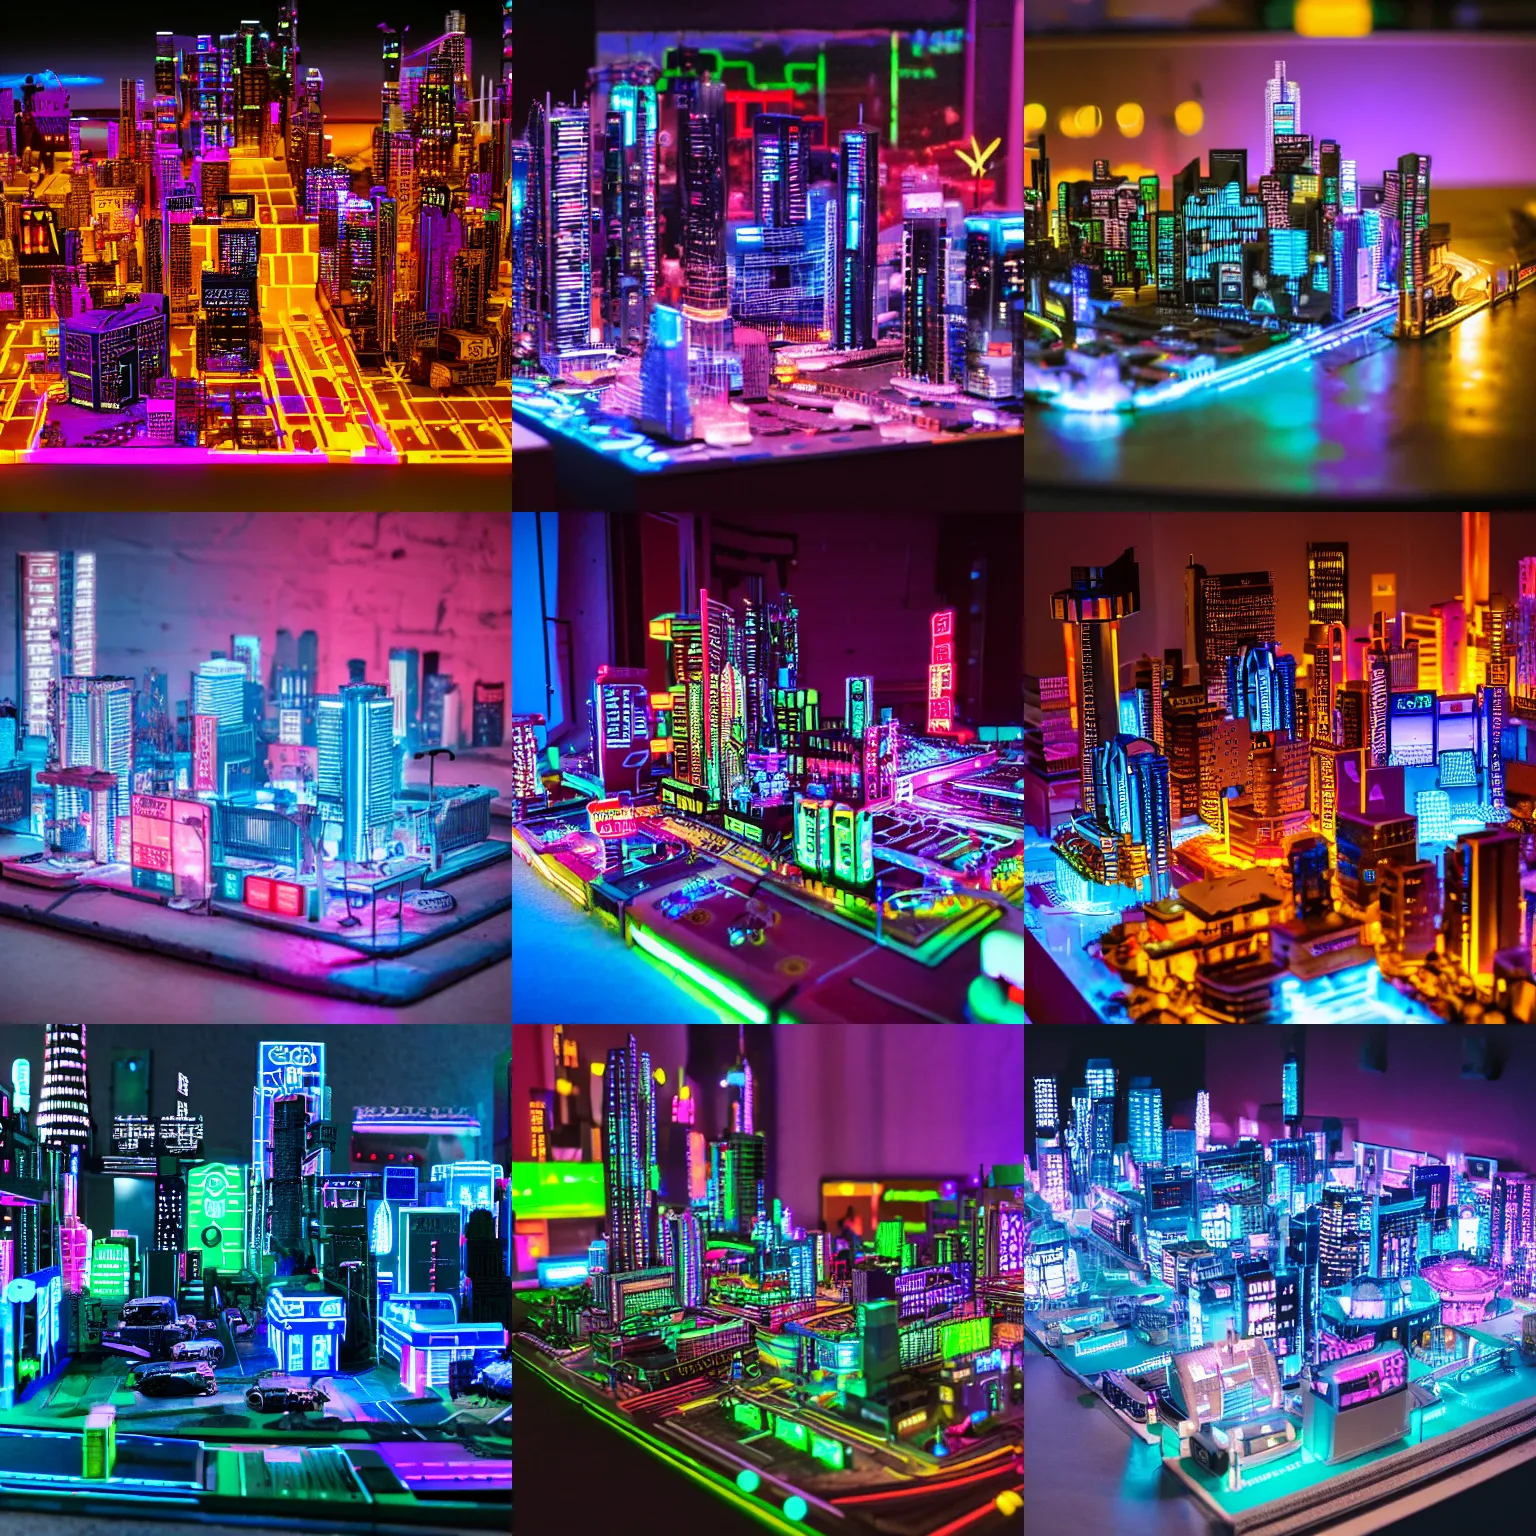 Prompt: miniature model of a cyberpunk city with neon lights